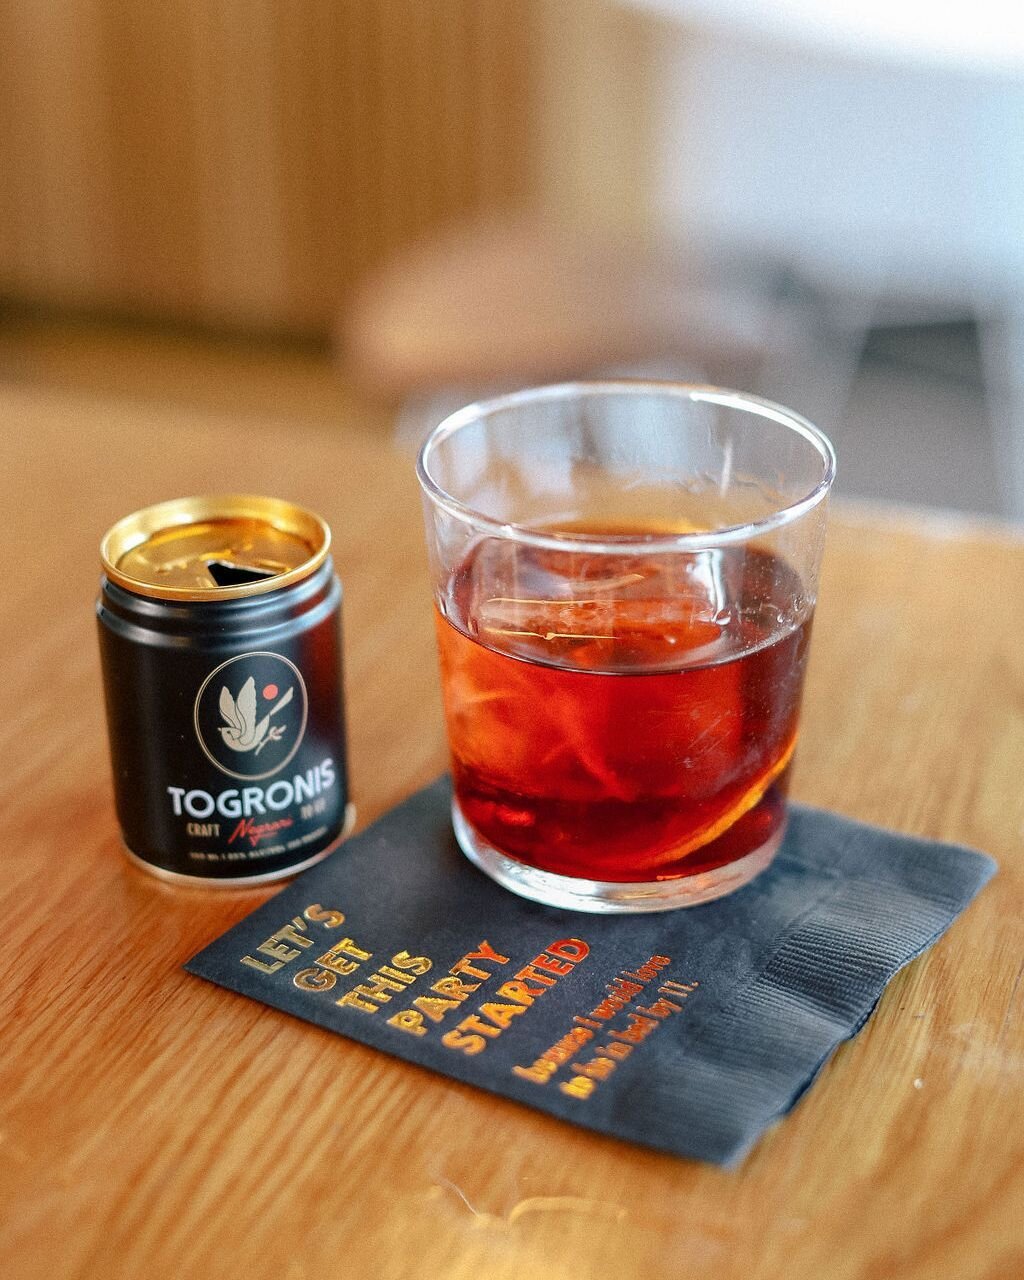 Meet your favorite Negroni cocktail in a cute can. 🤗

This Saturday! Join us in La Jolla for a tasting of these carefully and locally crafted concoctions.

Are you ready to try @togronis ?

Swing on by!

When: February 18th, 3-5pm
Where: MRKT SPACE 